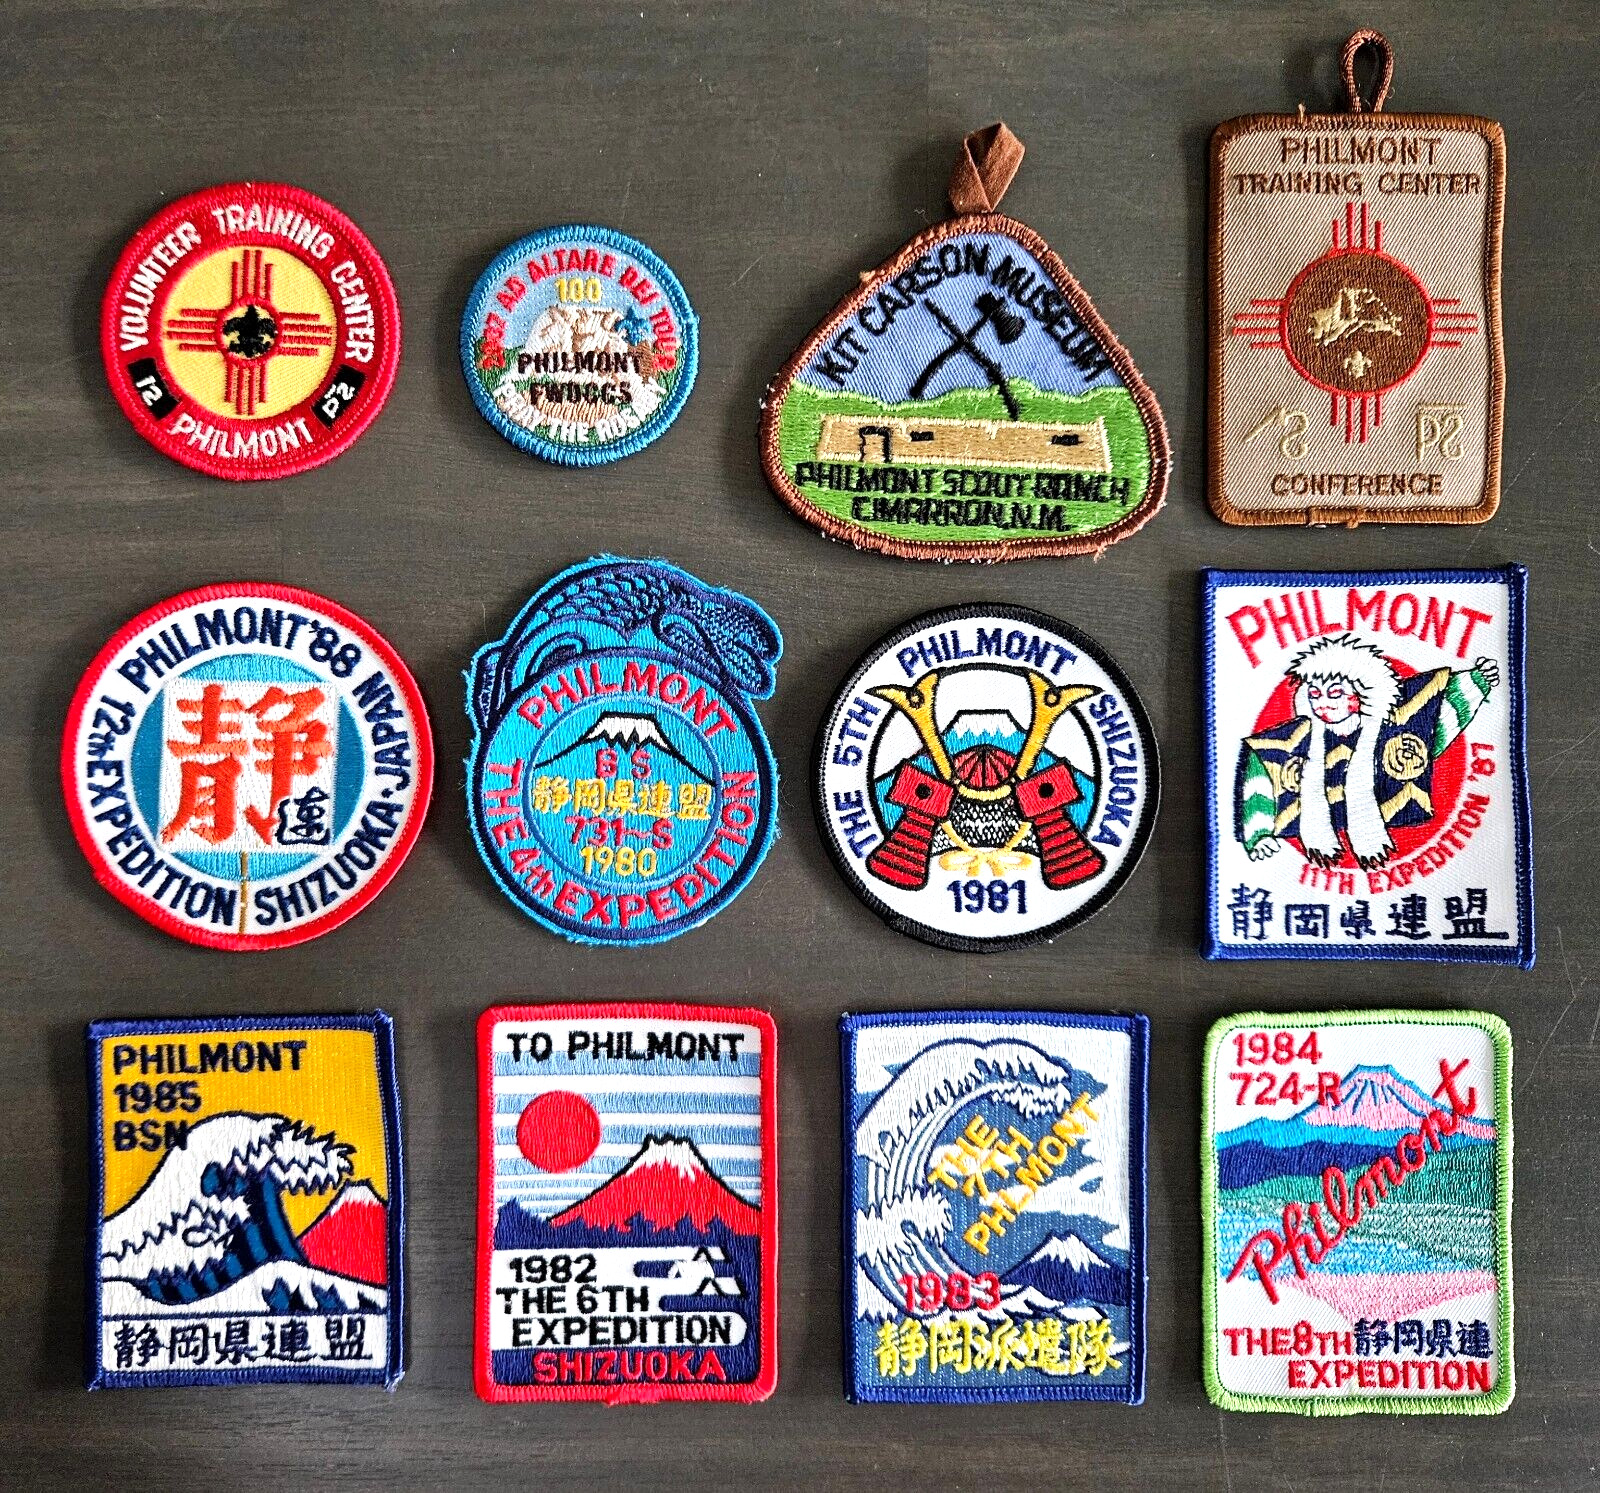 Philmont Scout Ranch Far East Japan Council Contingent Expedition Lot of 12